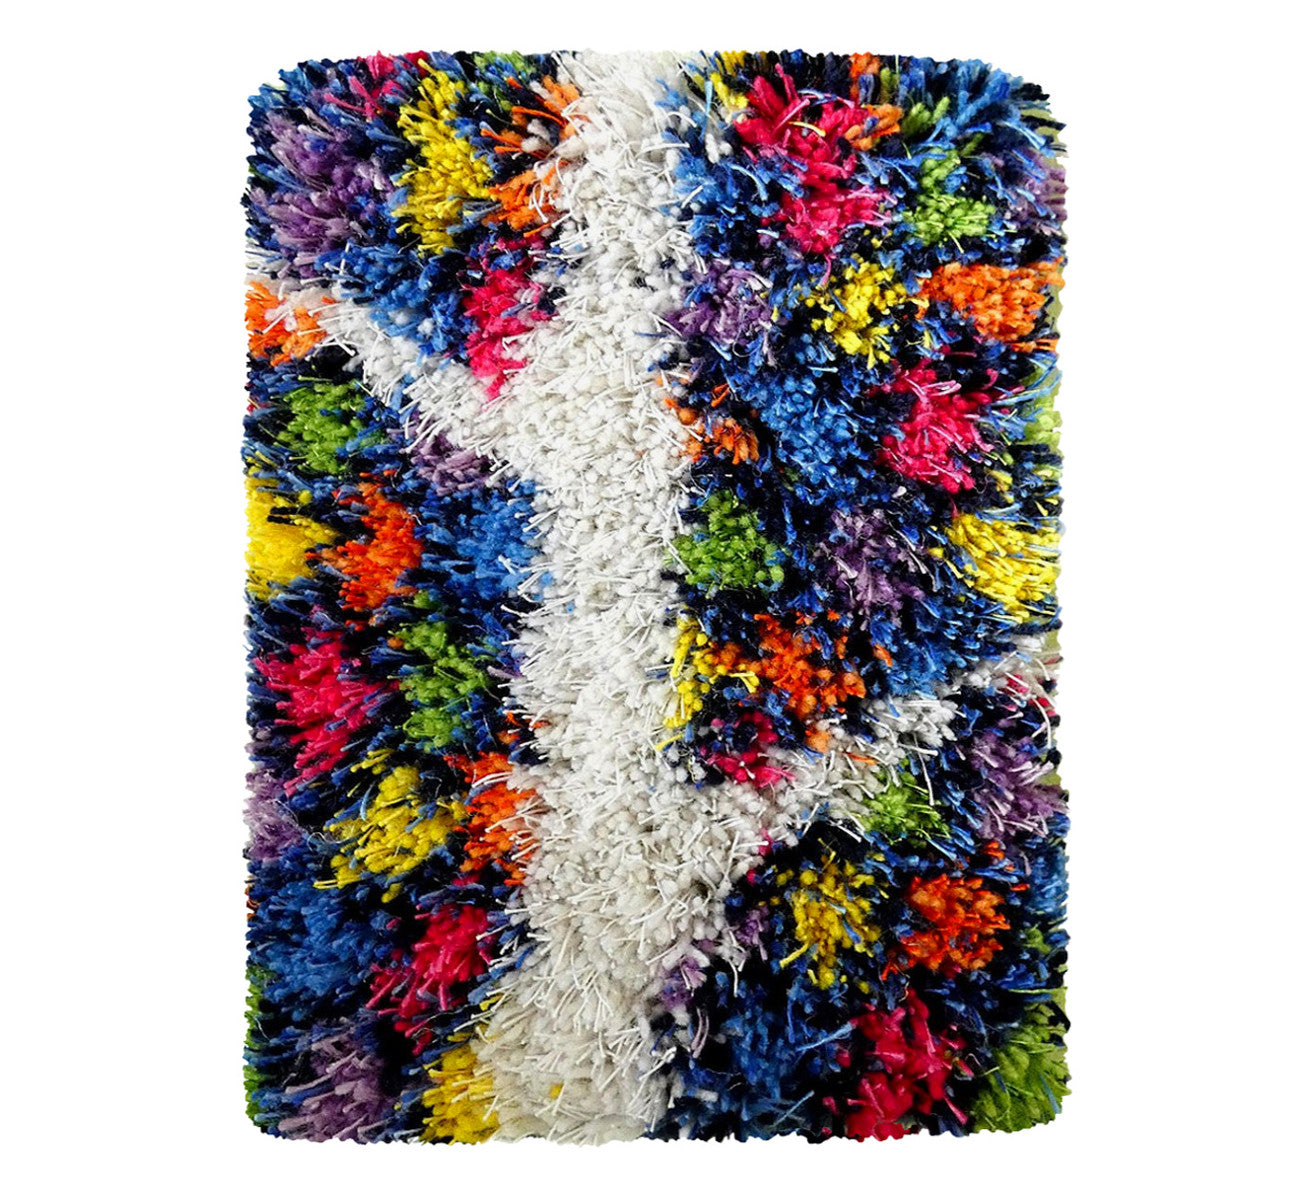 Handwoven wool-linen wall hanging rug, white branch figure on colorful base, 20 x 30 cm, 7,87 x 11,8".